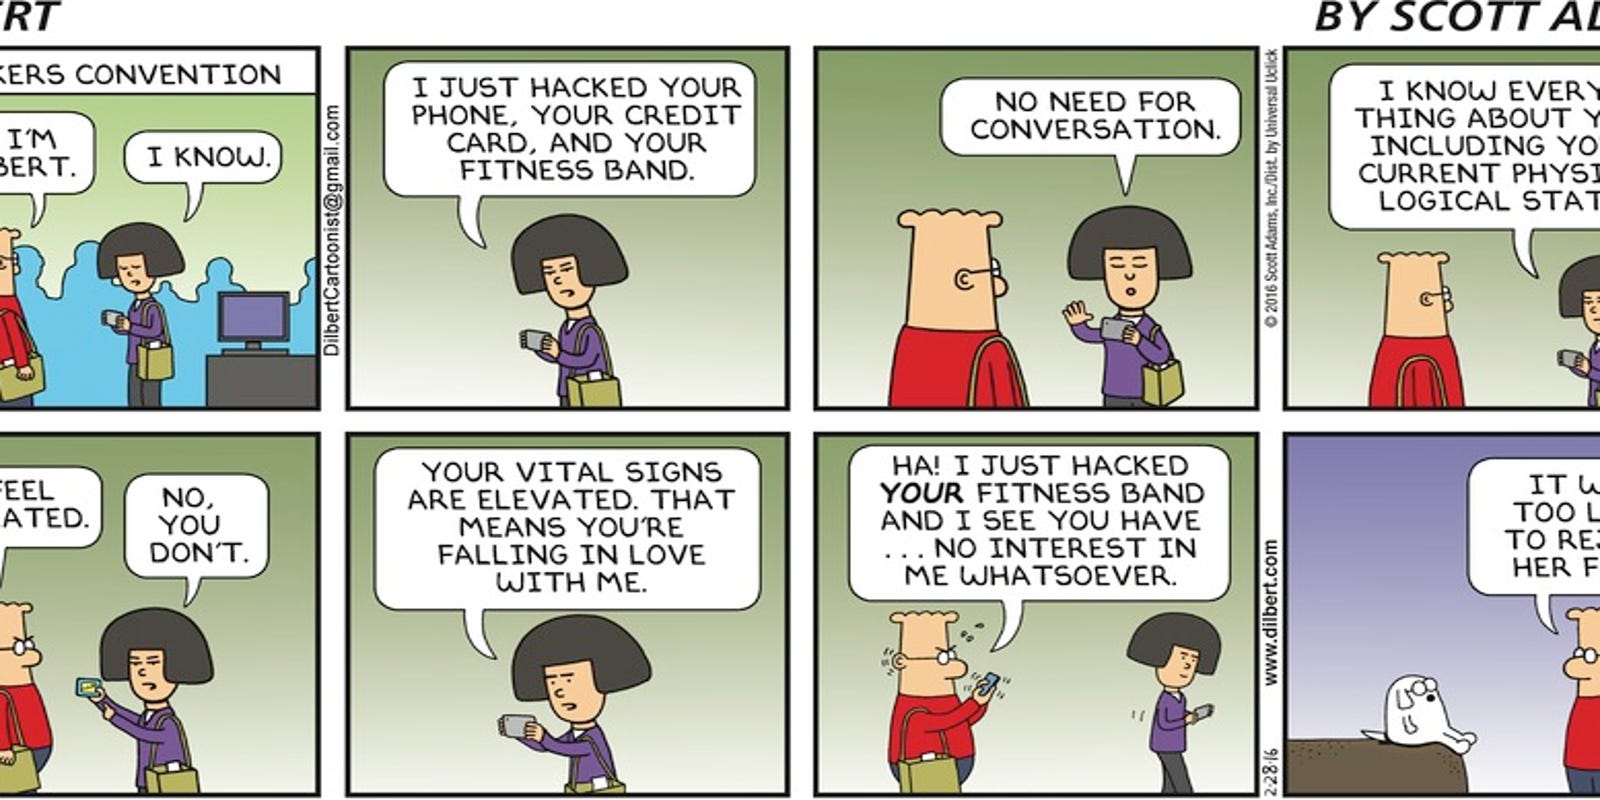 dilbert-gets-guest-artists-to-let-creator-rest